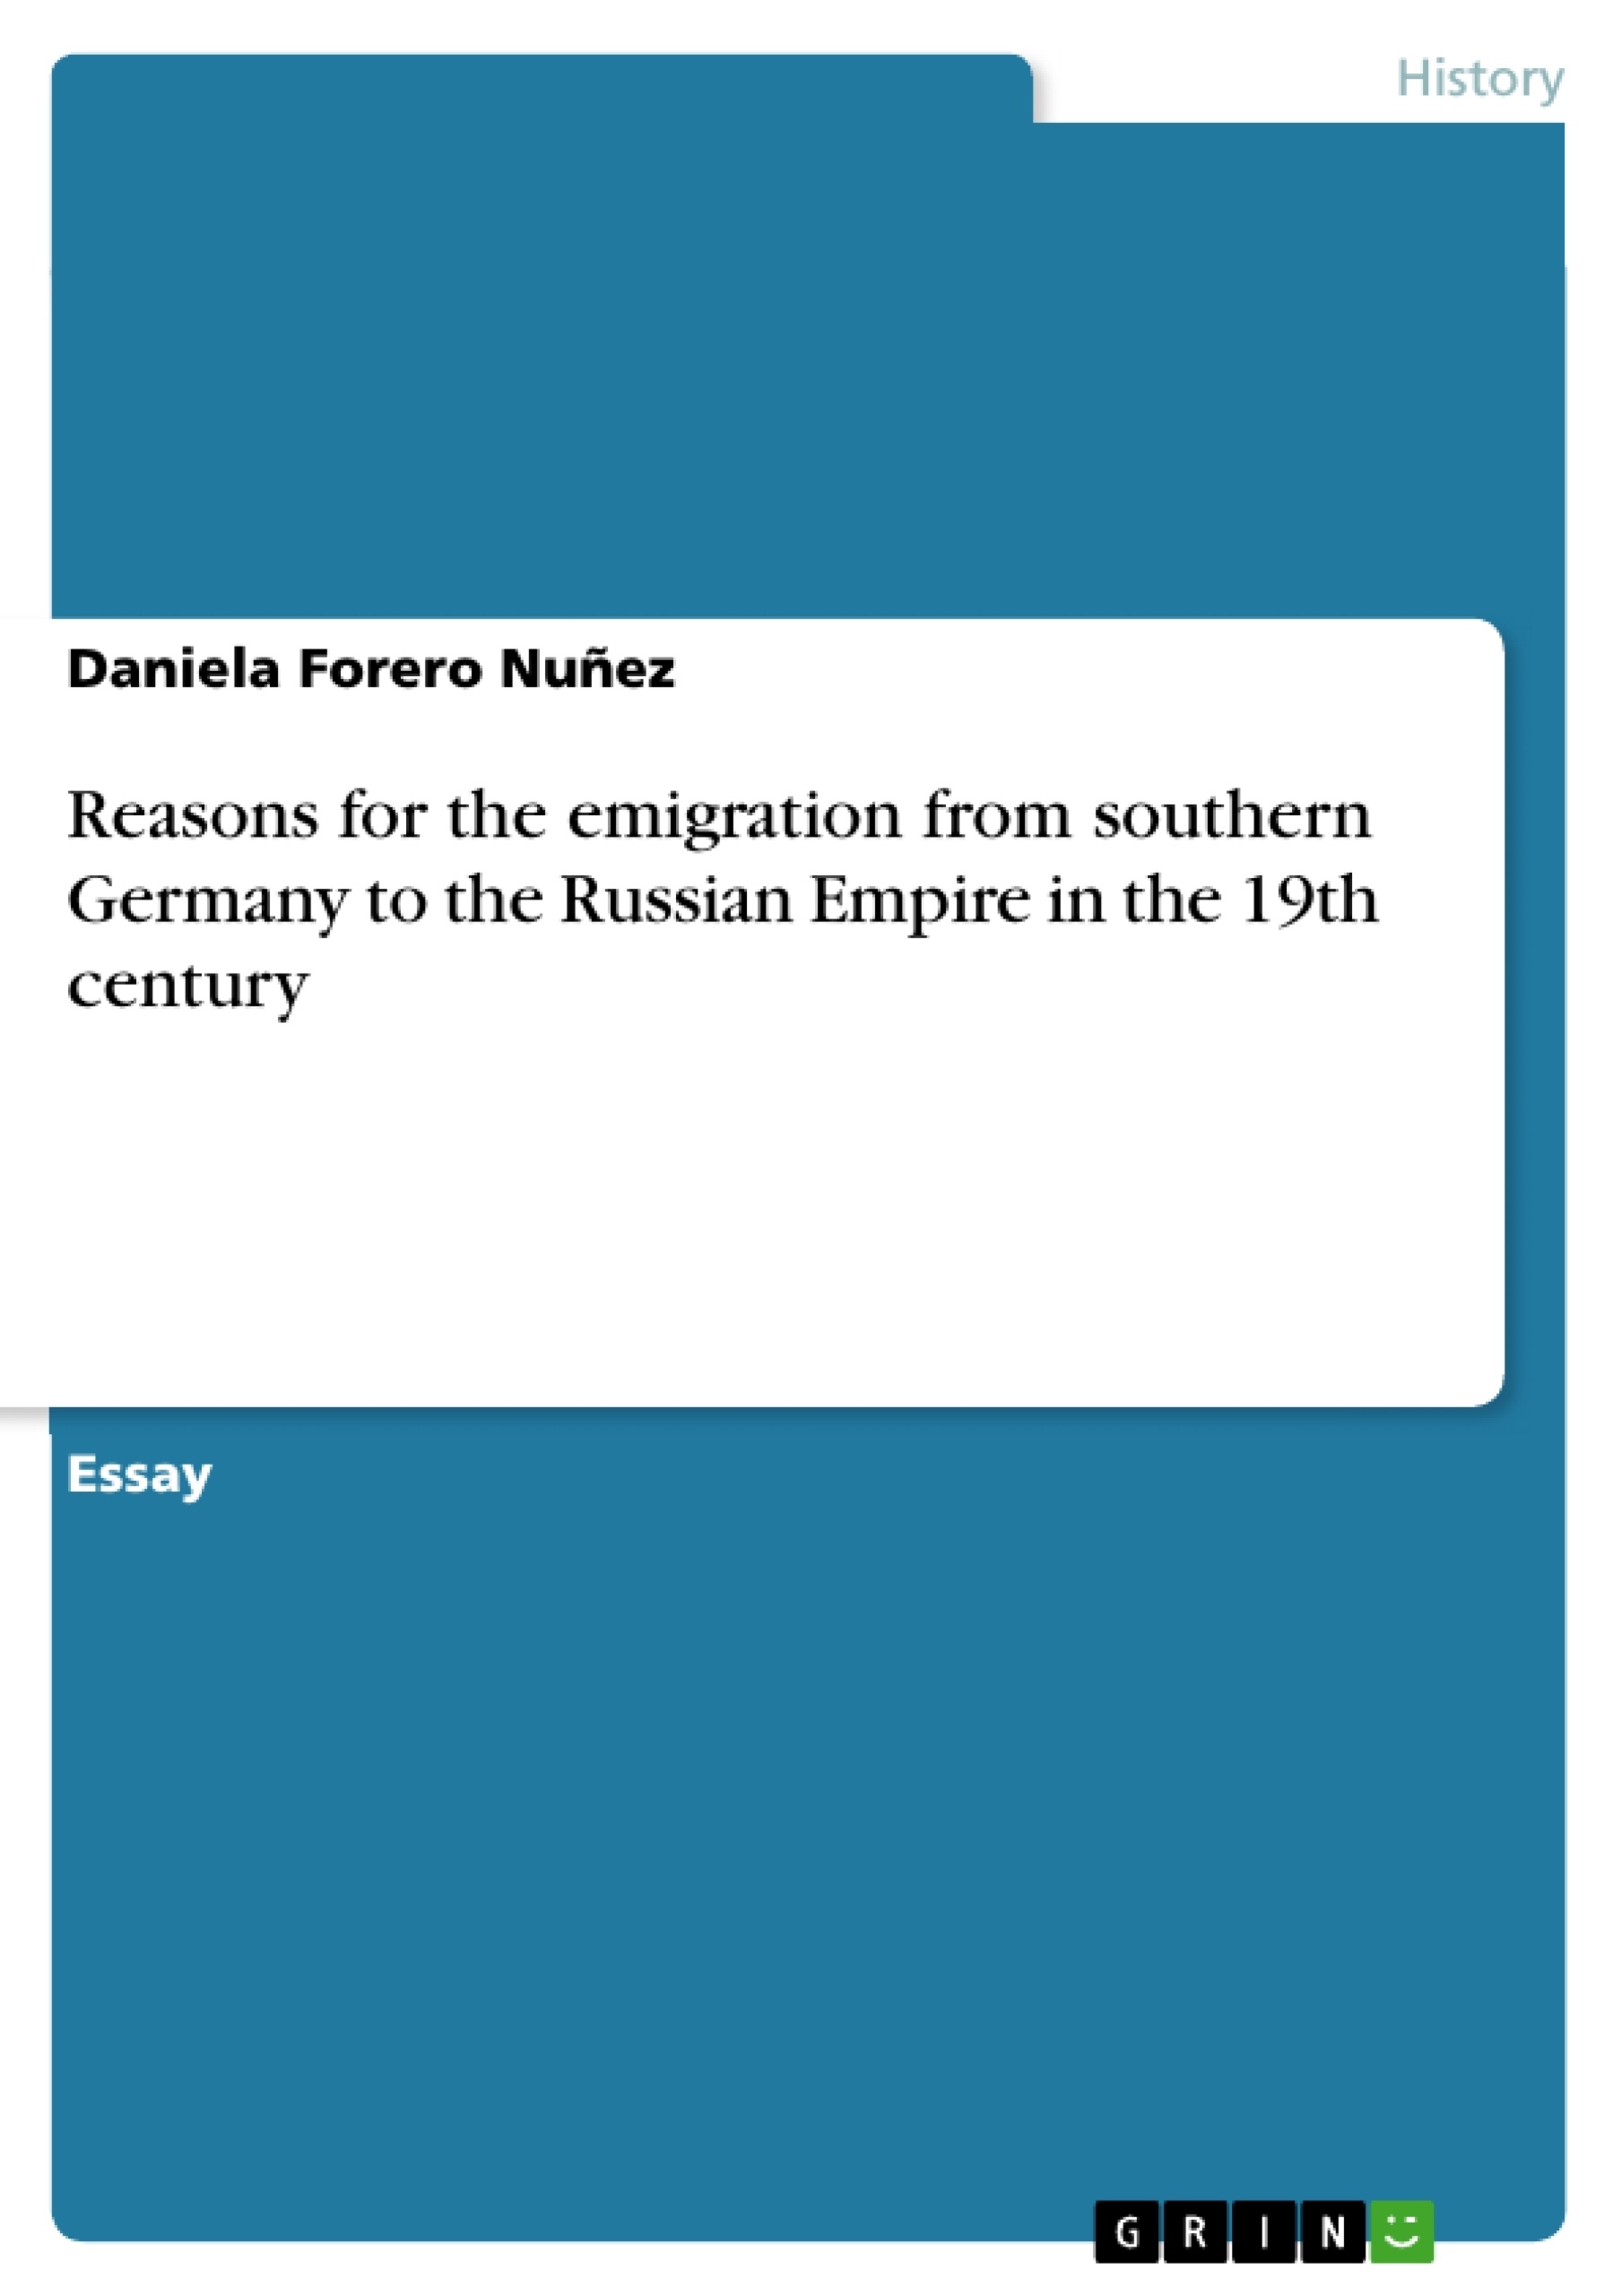 Title: Reasons for the emigration from southern Germany to the Russian Empire in the 19th century